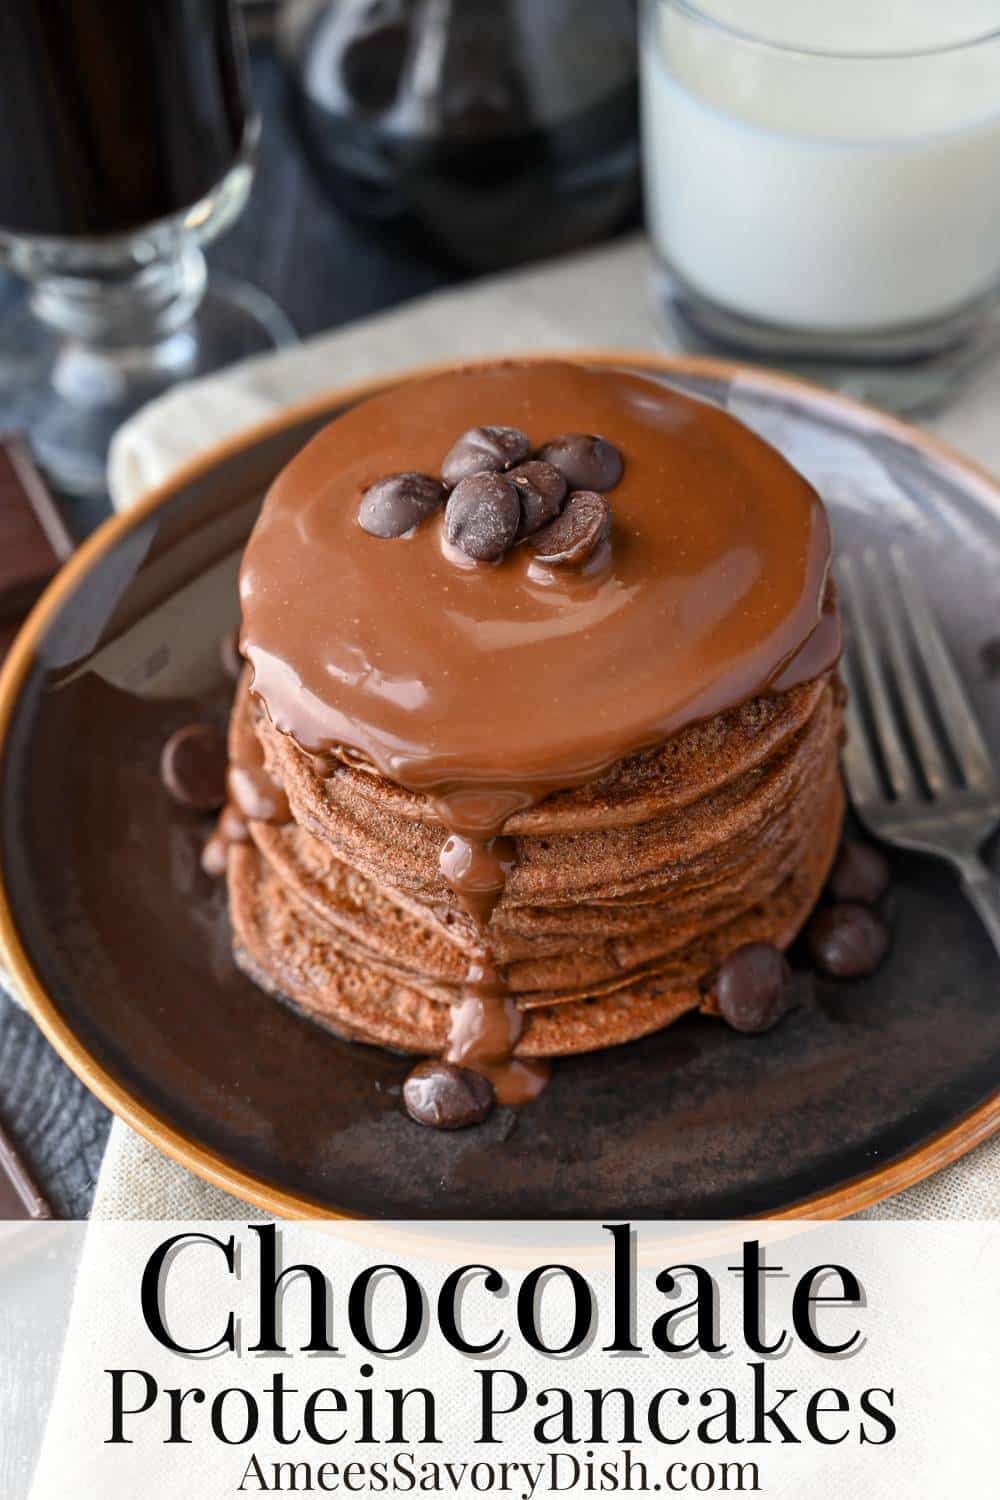 Indulge in chocolate protein pancakes –whipped up in a blender! Packed with chocolatey goodness and whey protein, they are the ultimate treat to fuel your morning! via @Ameessavorydish